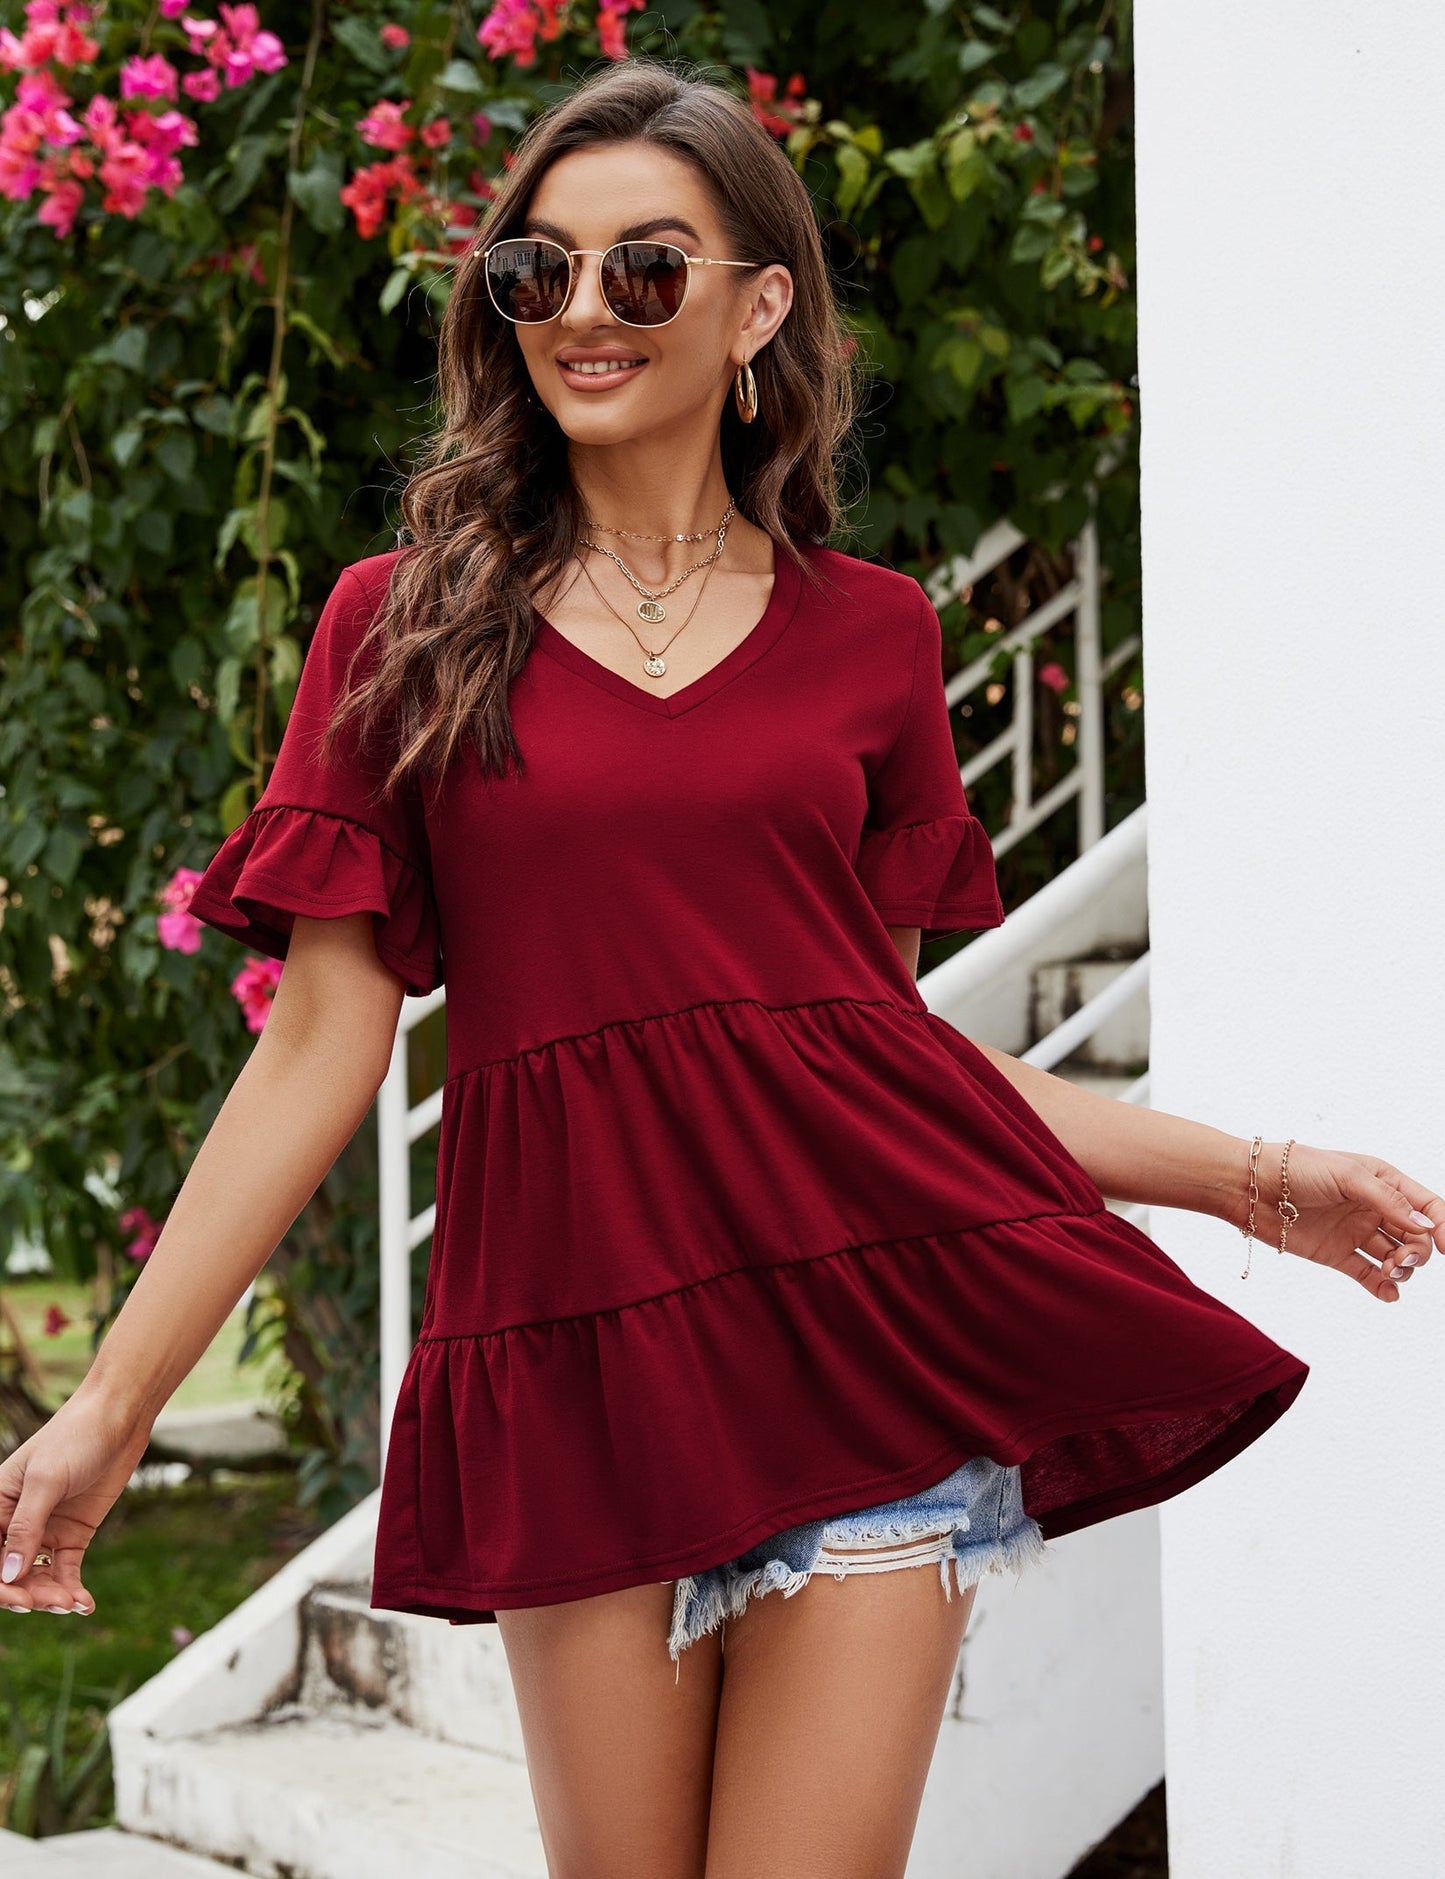 CLEARLOVE Peplum Tops for Women Summer Casual V Neck T Shirts Wine Red